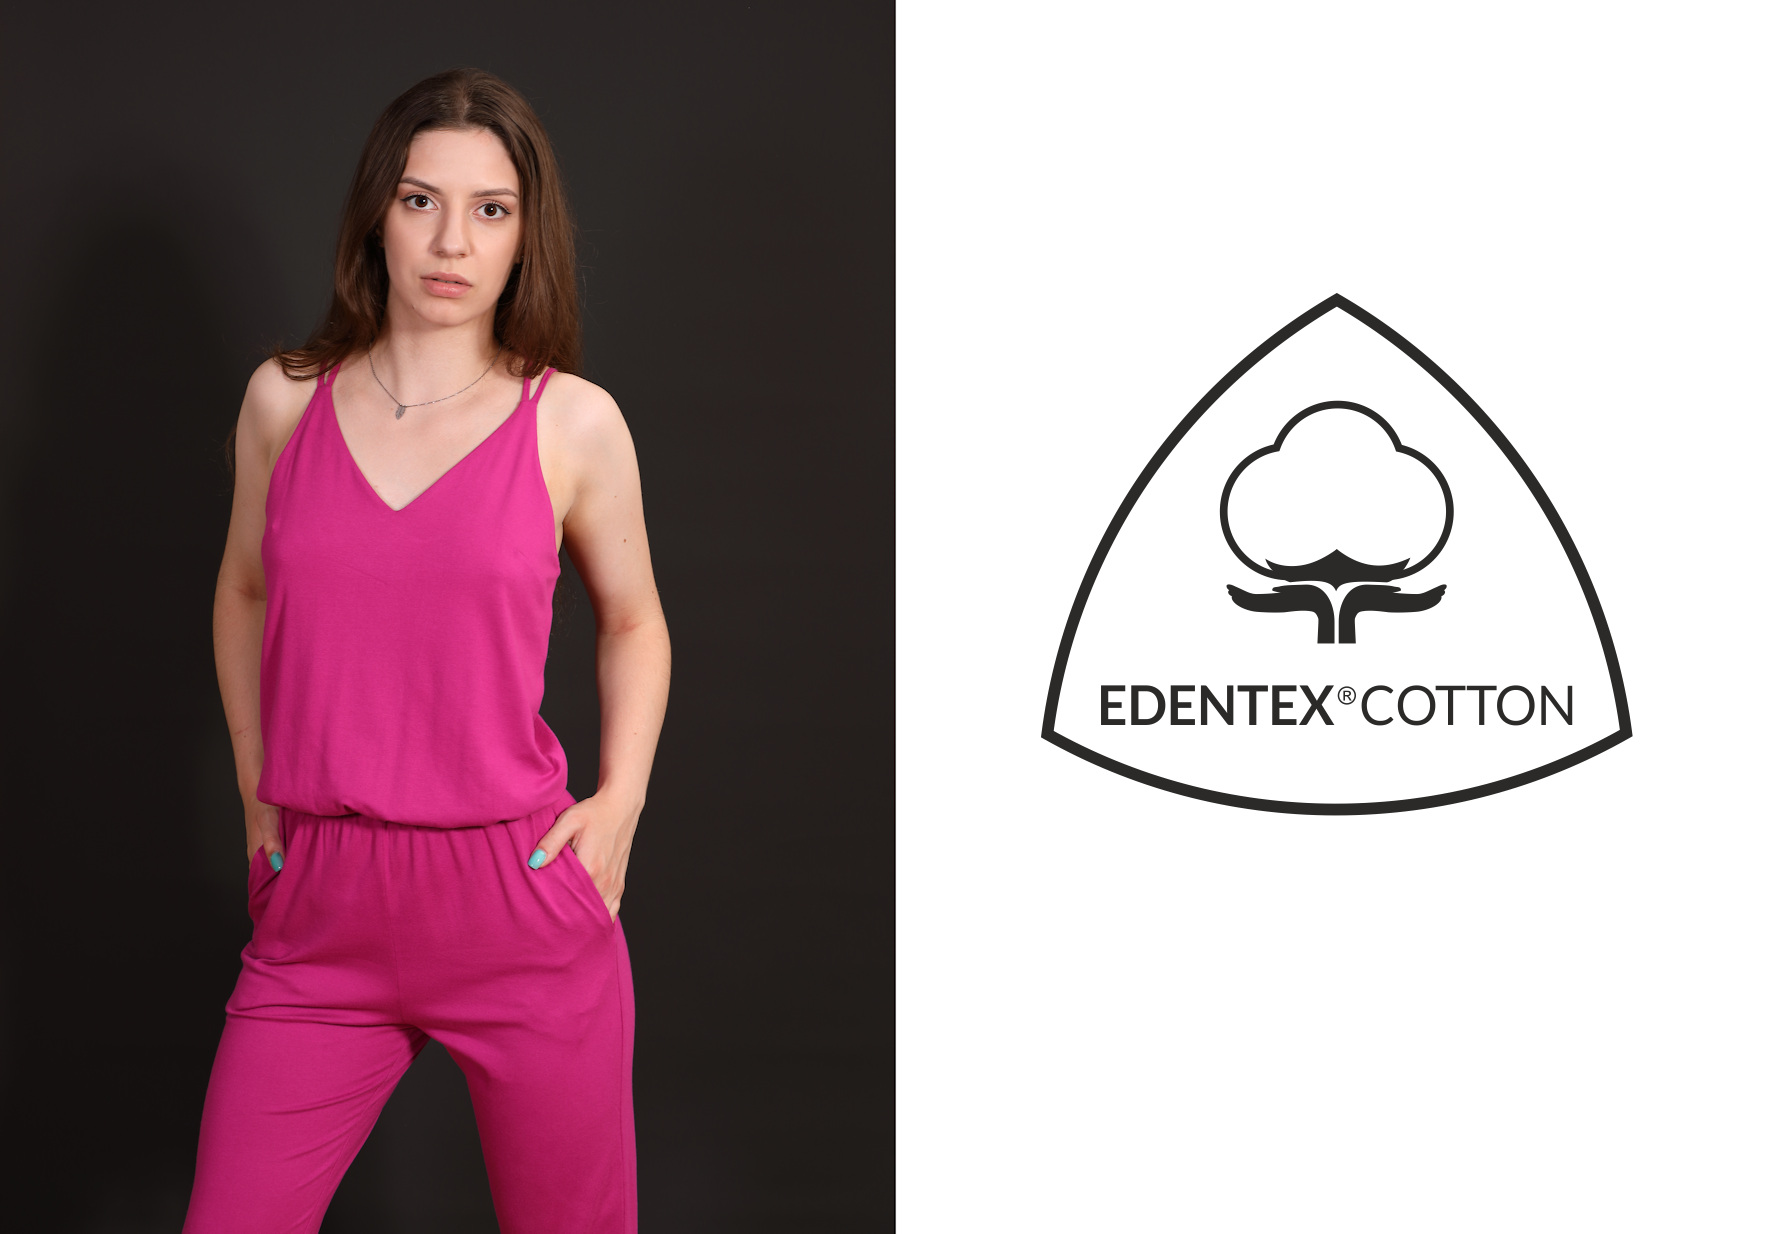 We create EDENTEX® cotton jersey fabrics for nature lovers filled with respect for its power and beauty, who don’t like to separate from it with absolutely anything